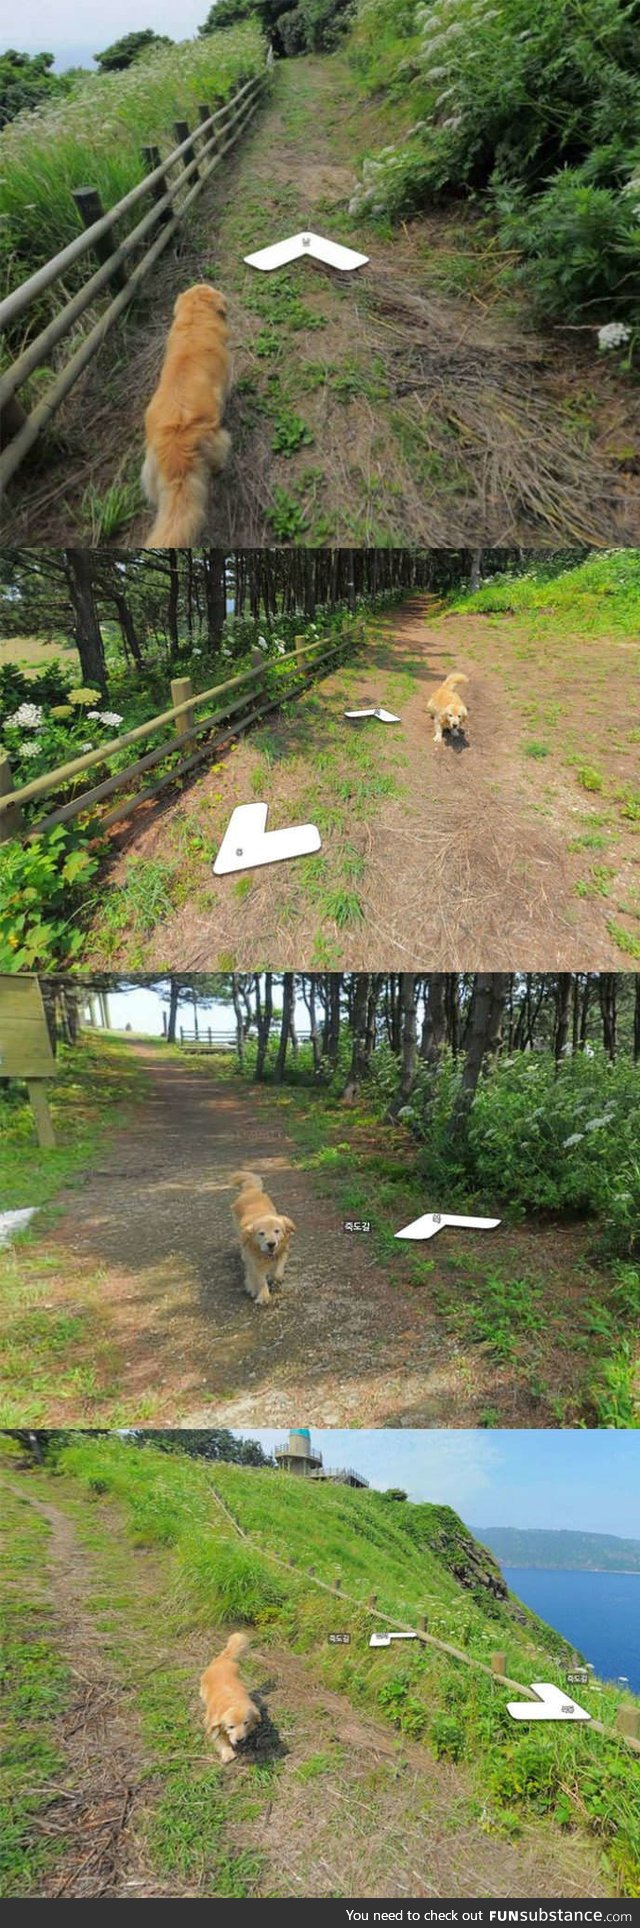 This dog followed the google earth guy